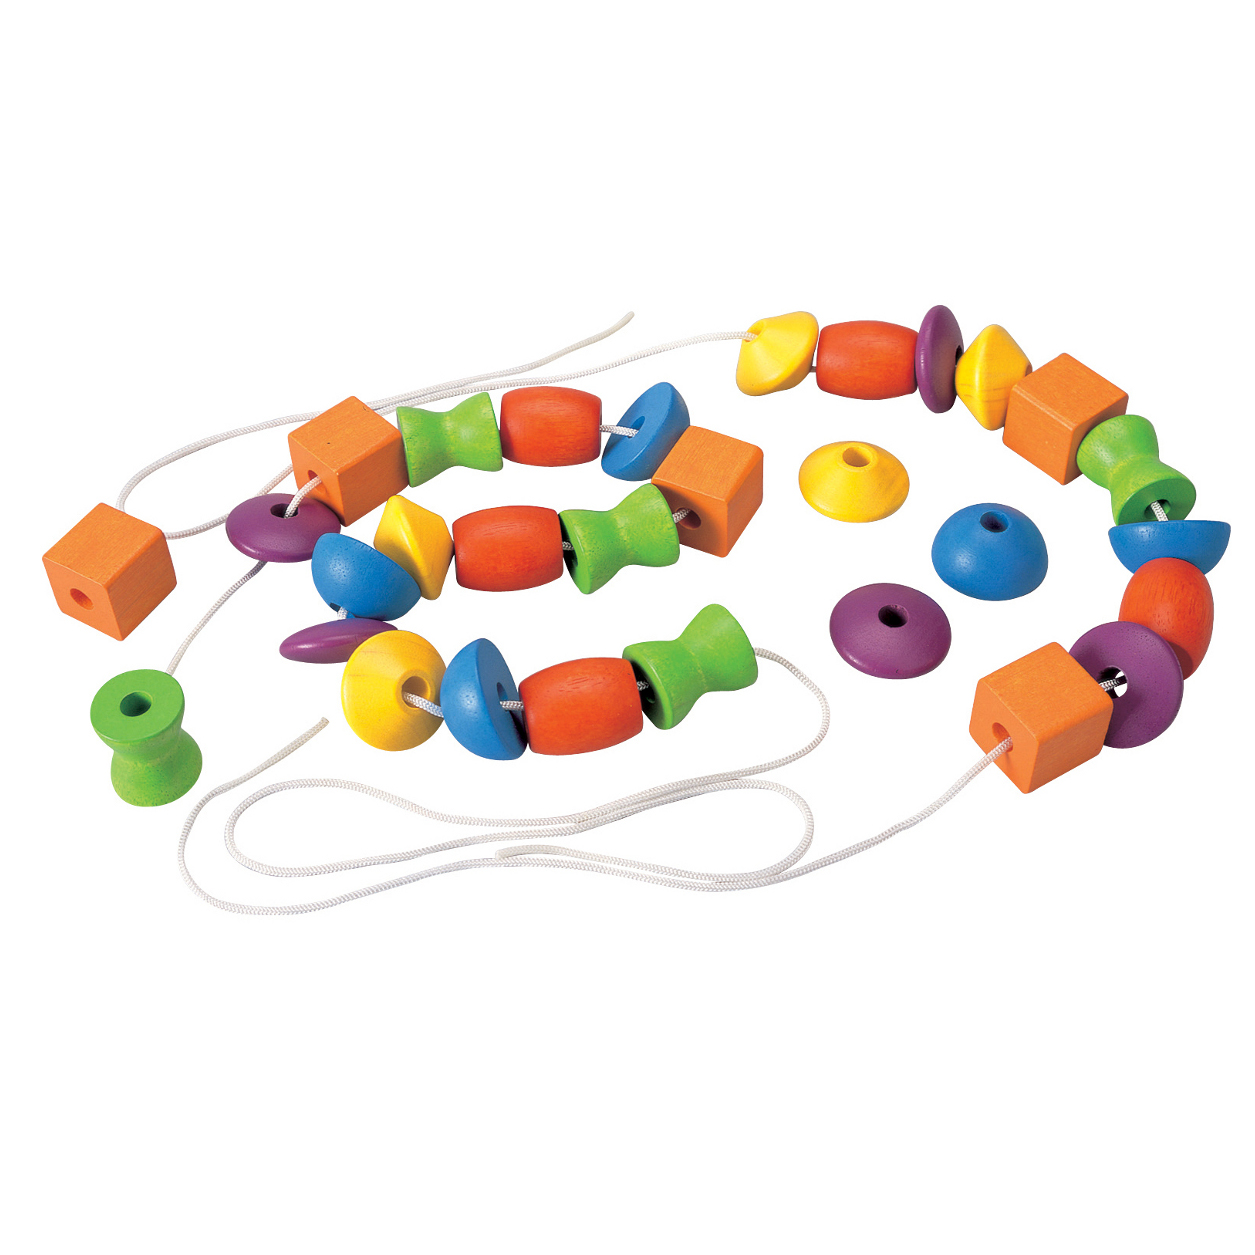 Lacing Beads Wooden Educational Toy